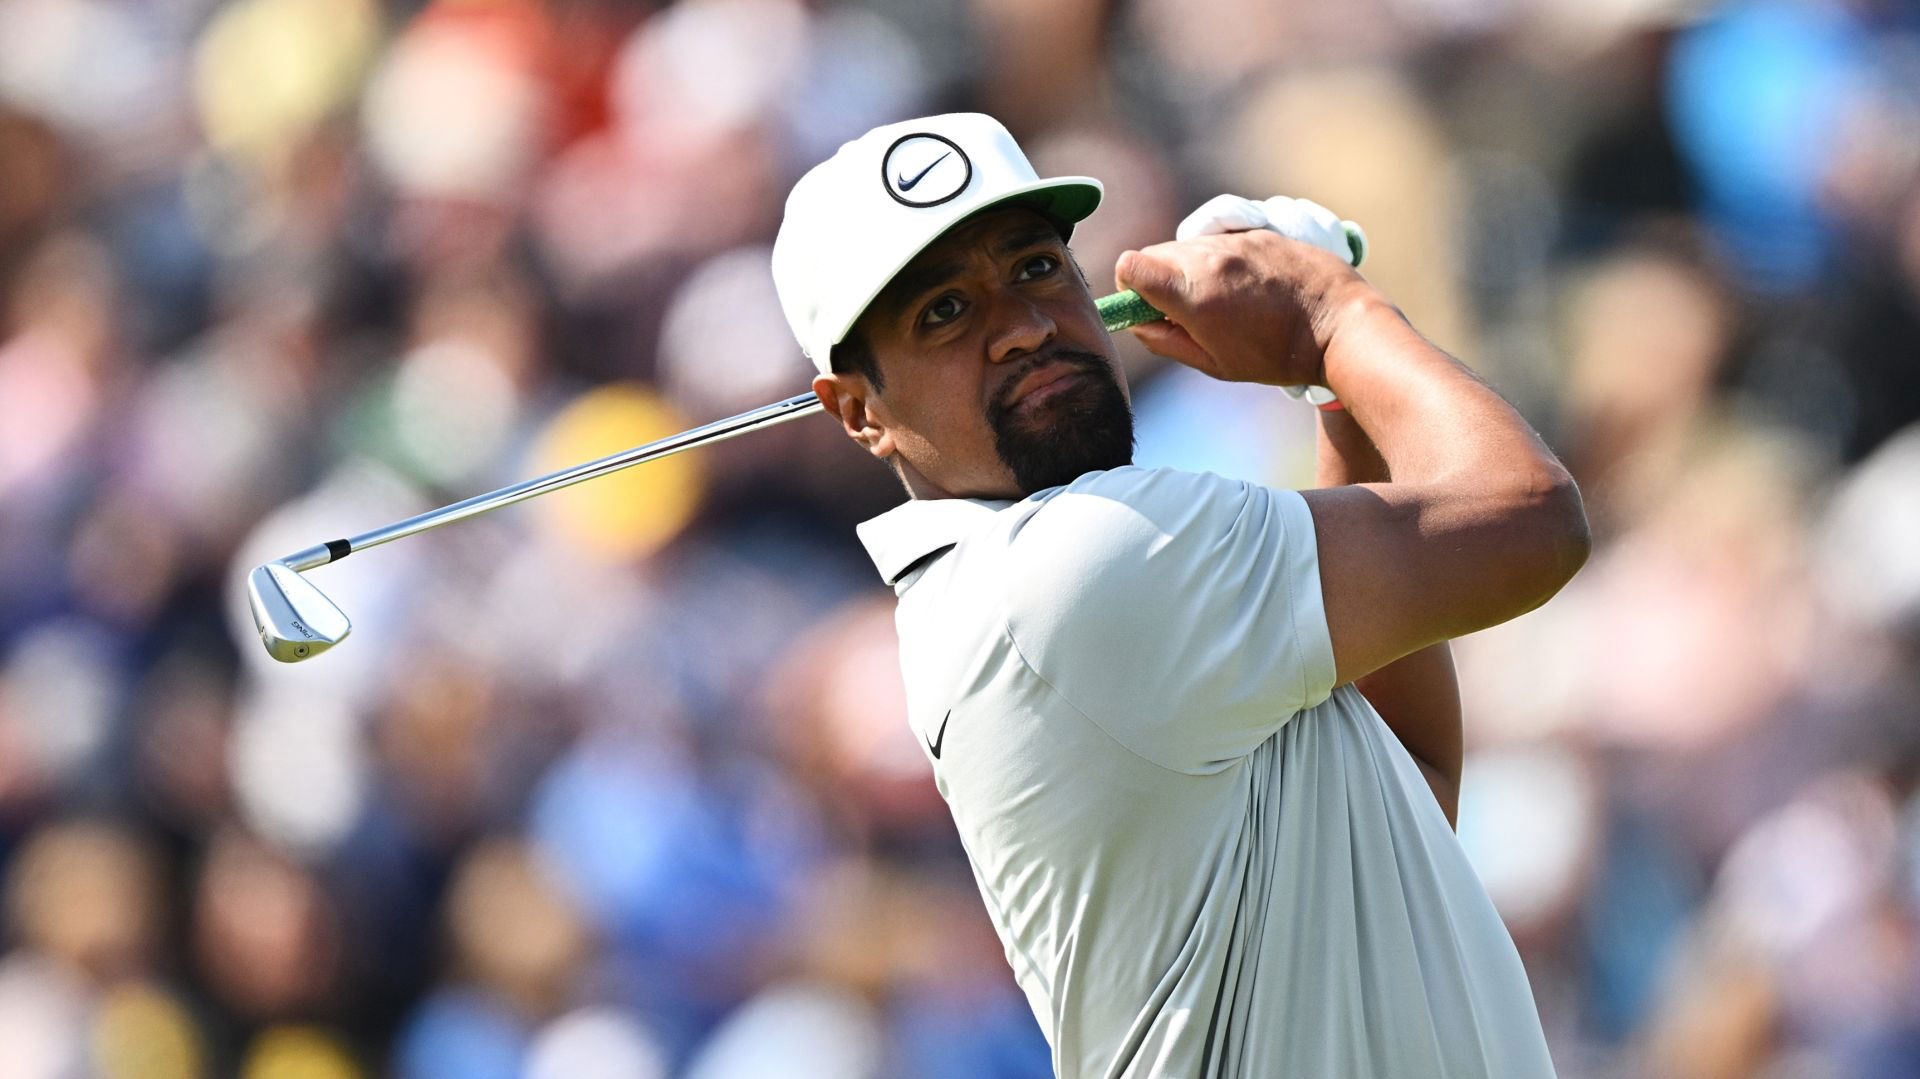 3M Open Power Rankings Ranking the Top Golfers in this Week's Field